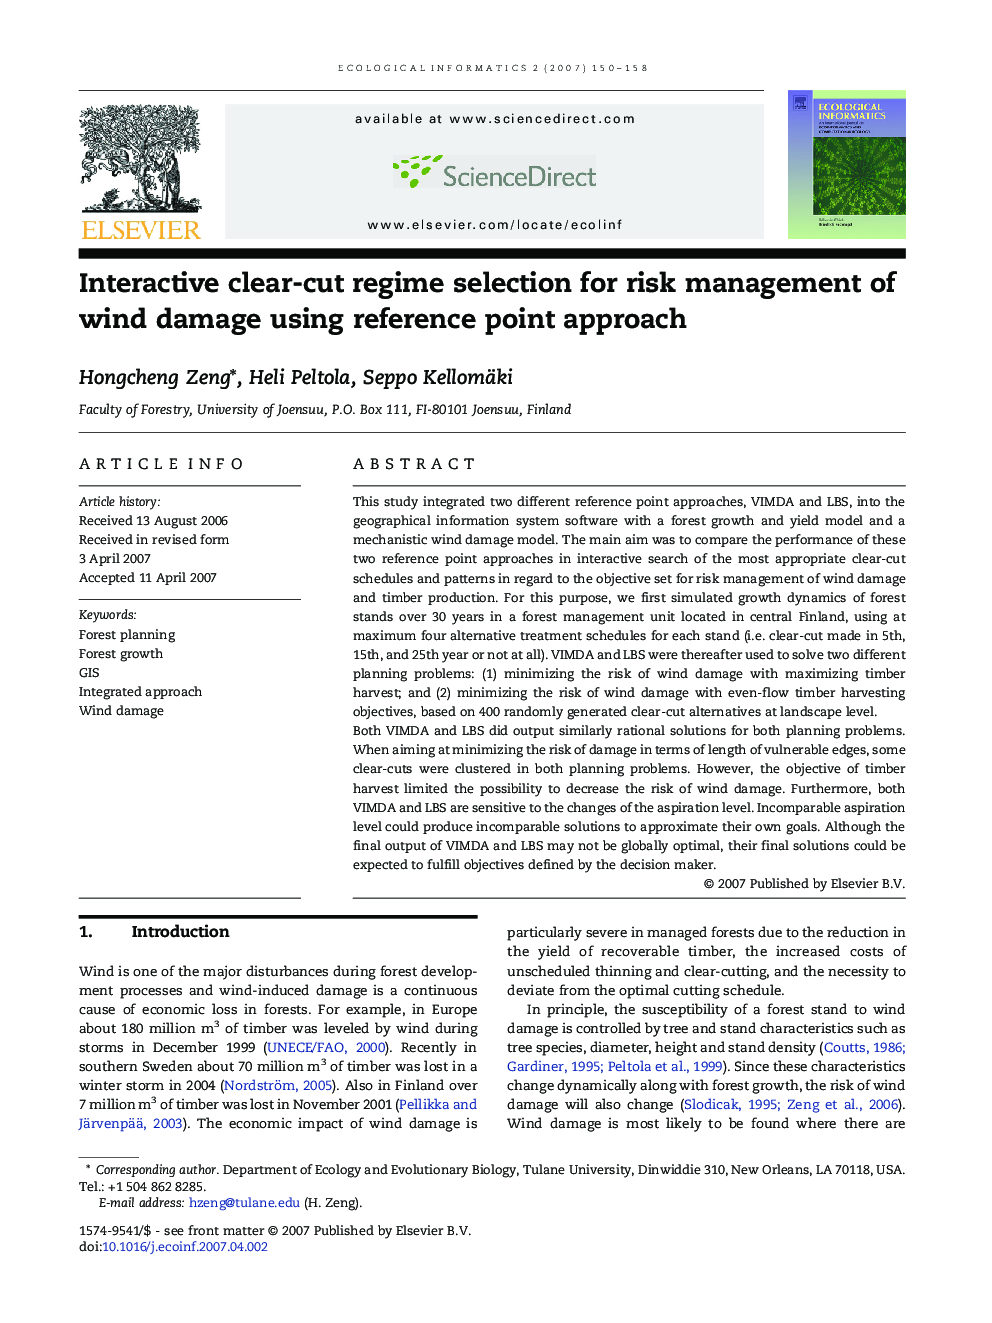 Interactive clear-cut regime selection for risk management of wind damage using reference point approach